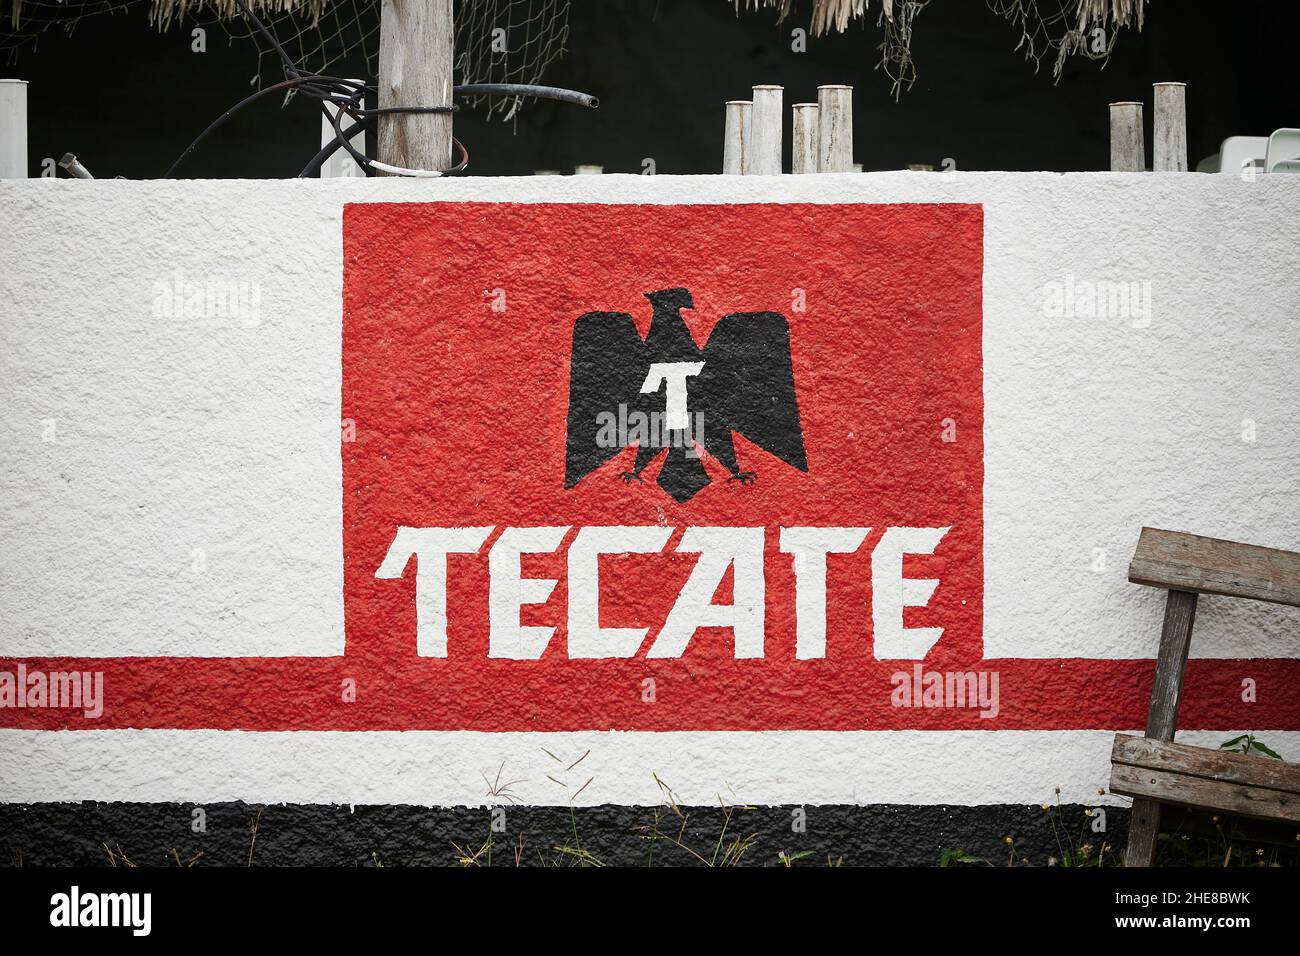 Tecate beer sign painted on a building in Chiquila, Mexico Stock Photo